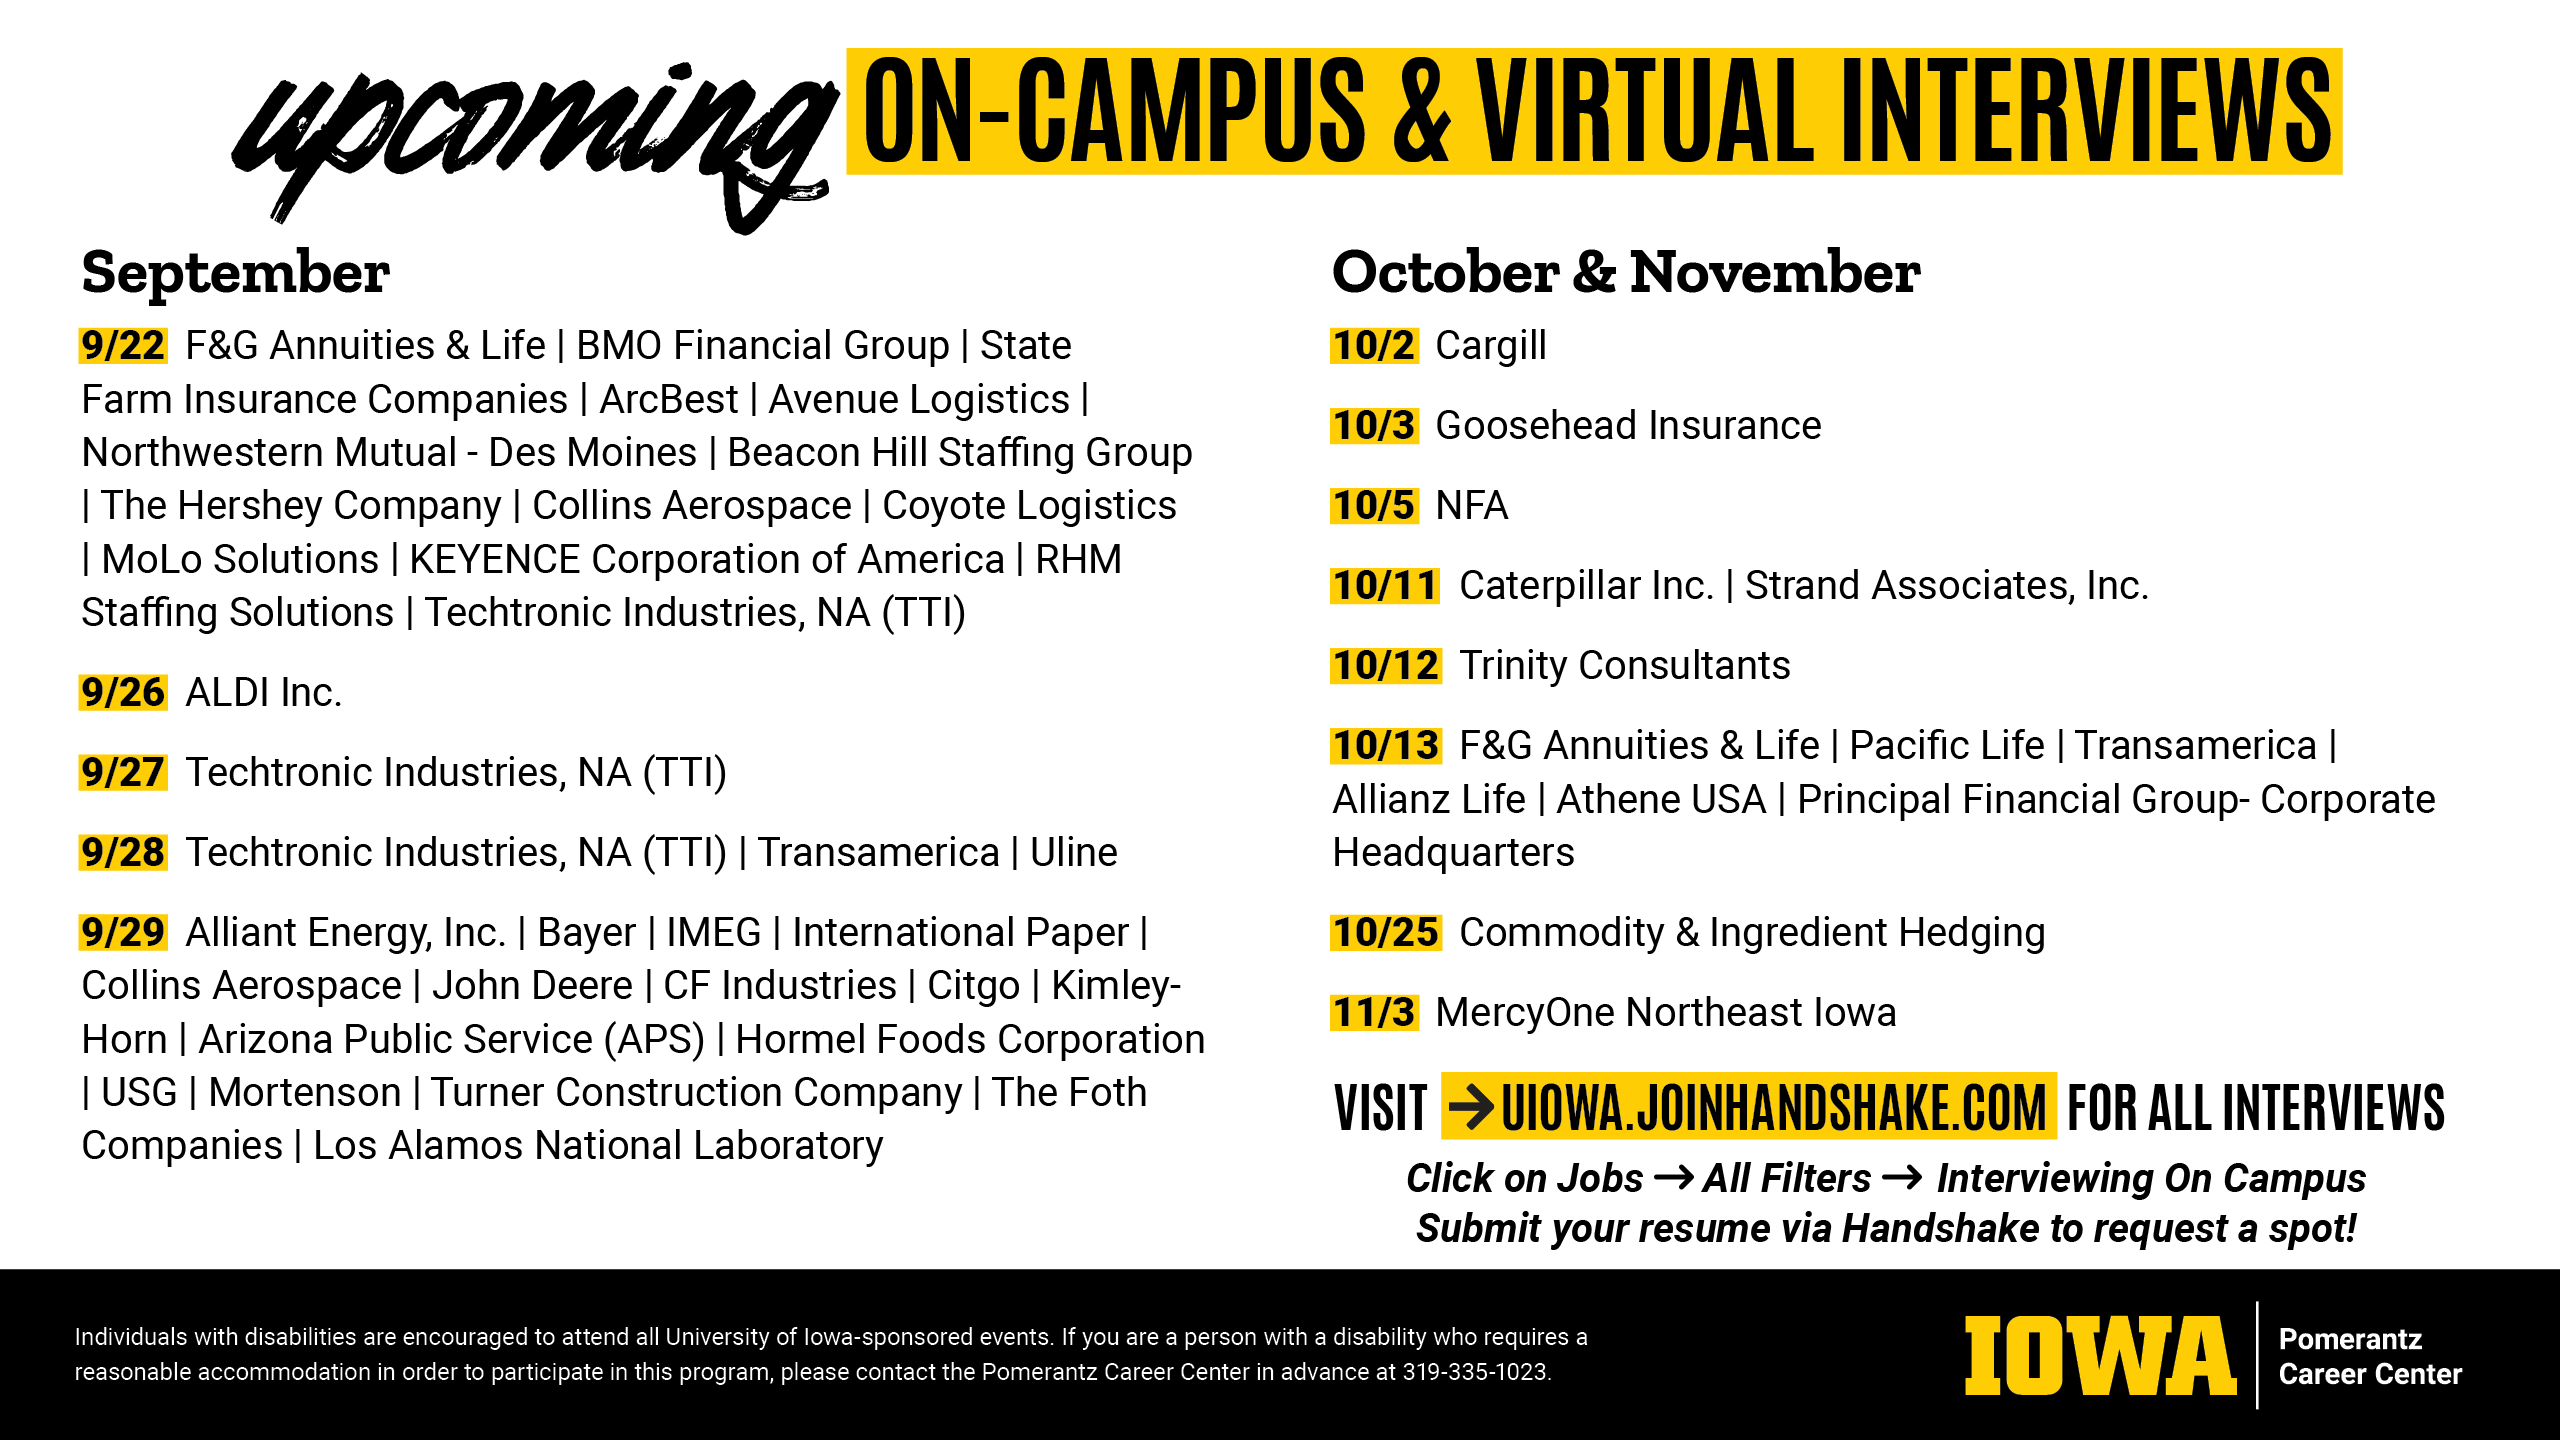 list of on-campus and virtual interviews for september, october, november